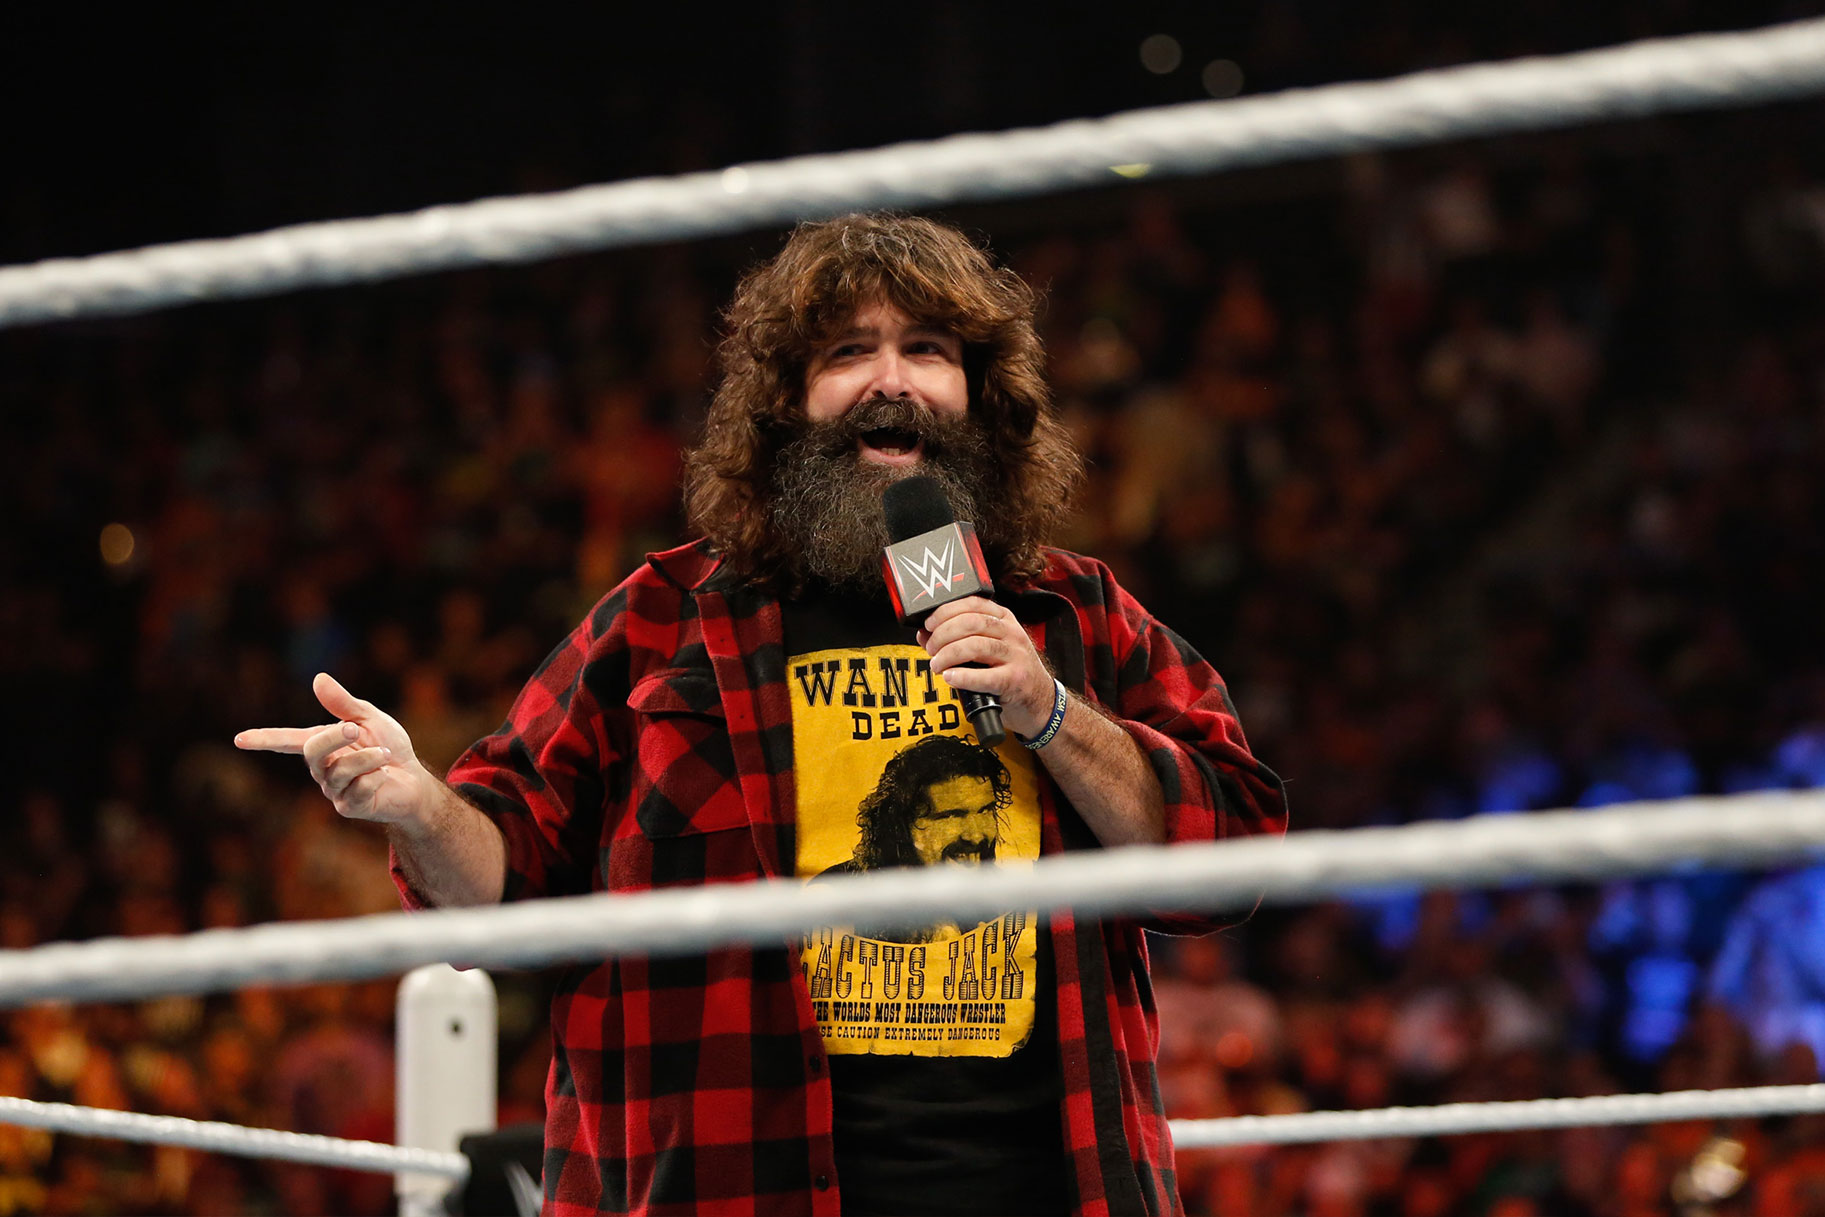 Mick Foley speaking into a mic inside the ring